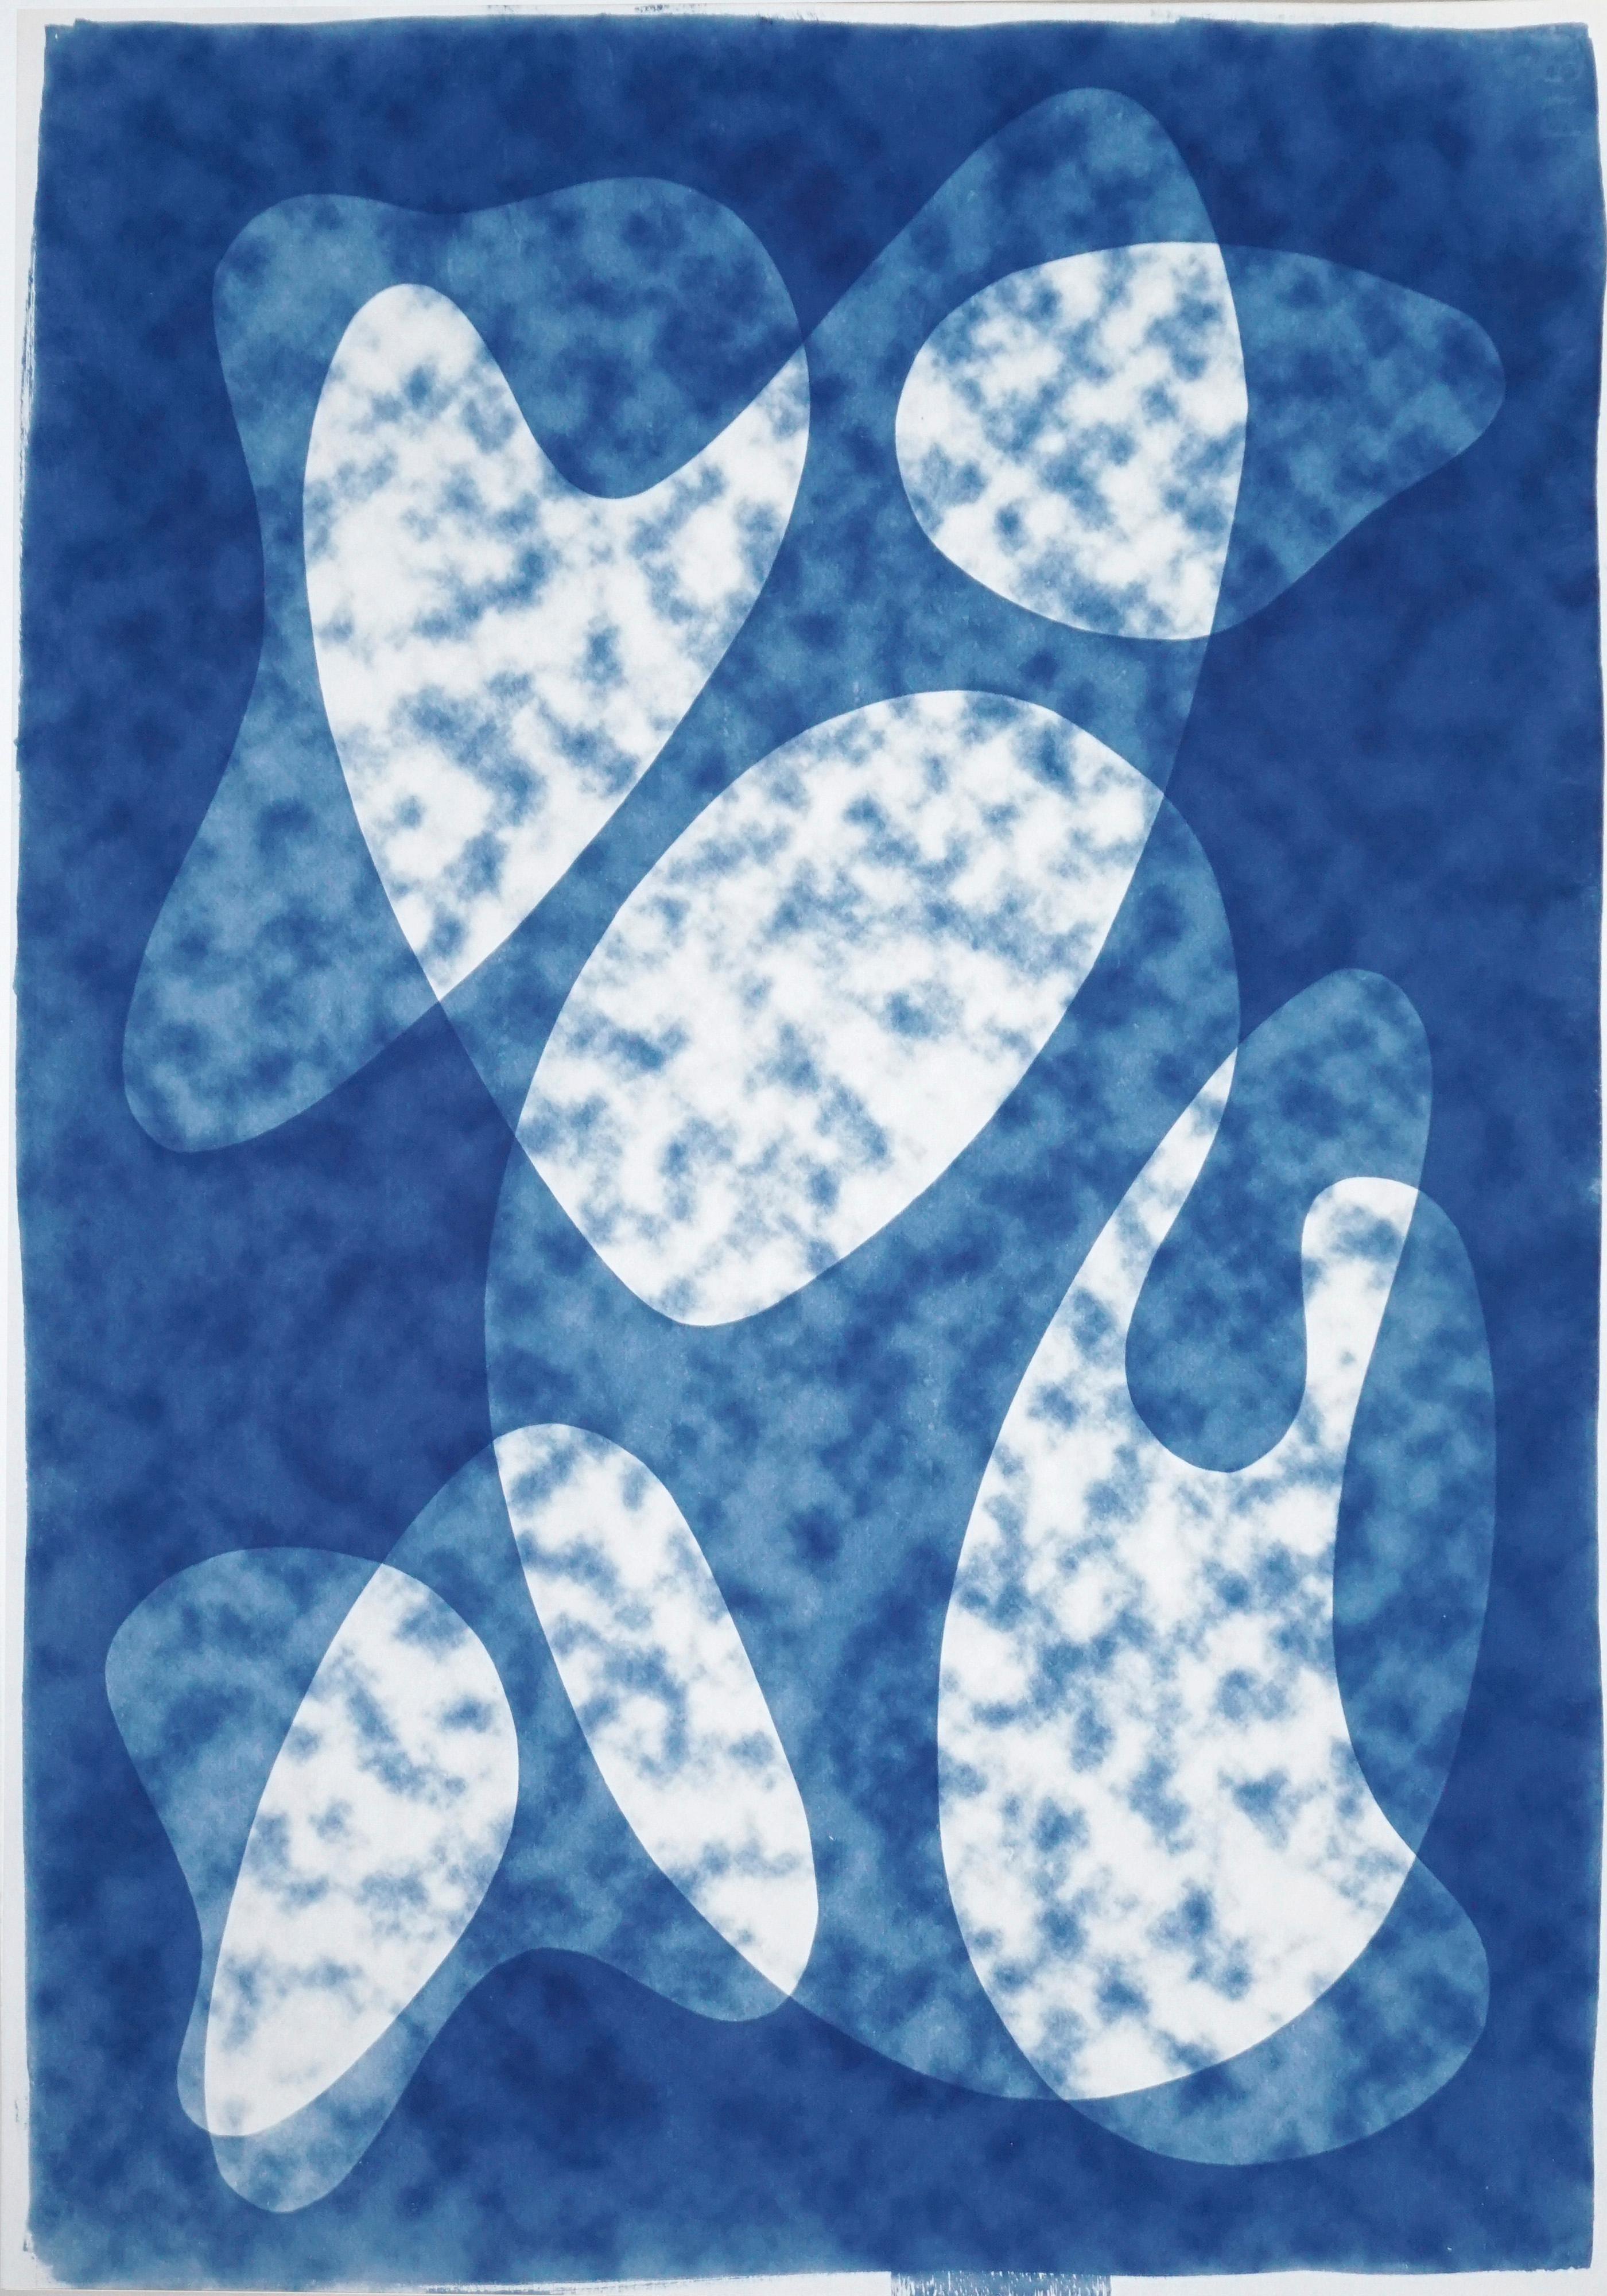 Mid-Century Cyanotype of Dark Cloudy Shapes, Abstract Unique Print in Blue Tones